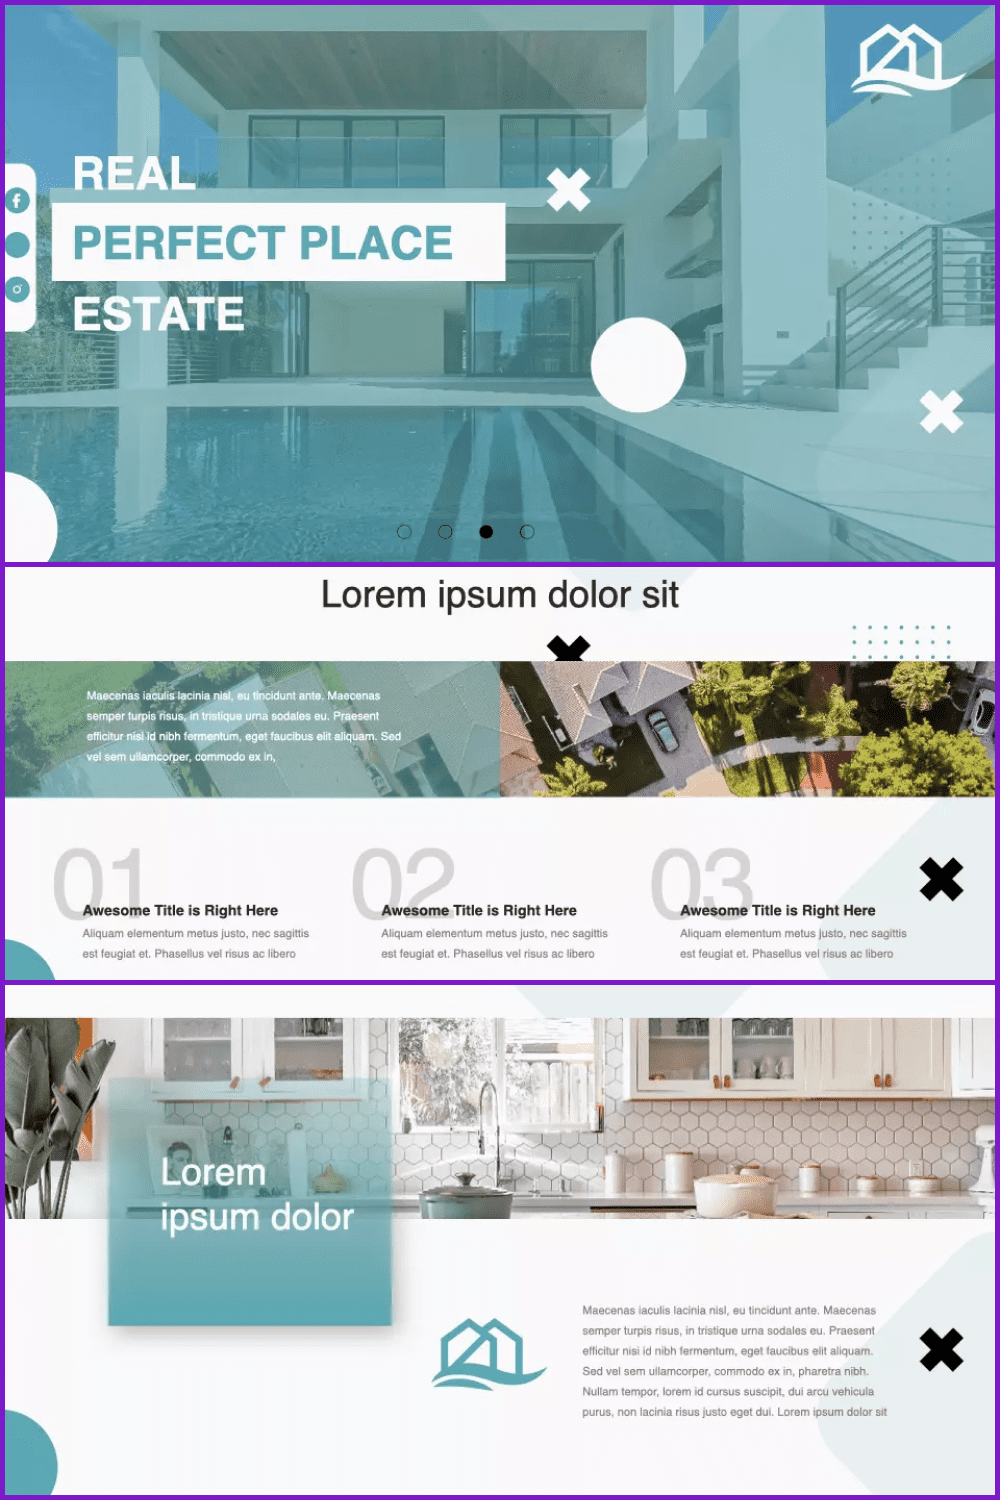 Collage with real estates slides with green backgrounds.